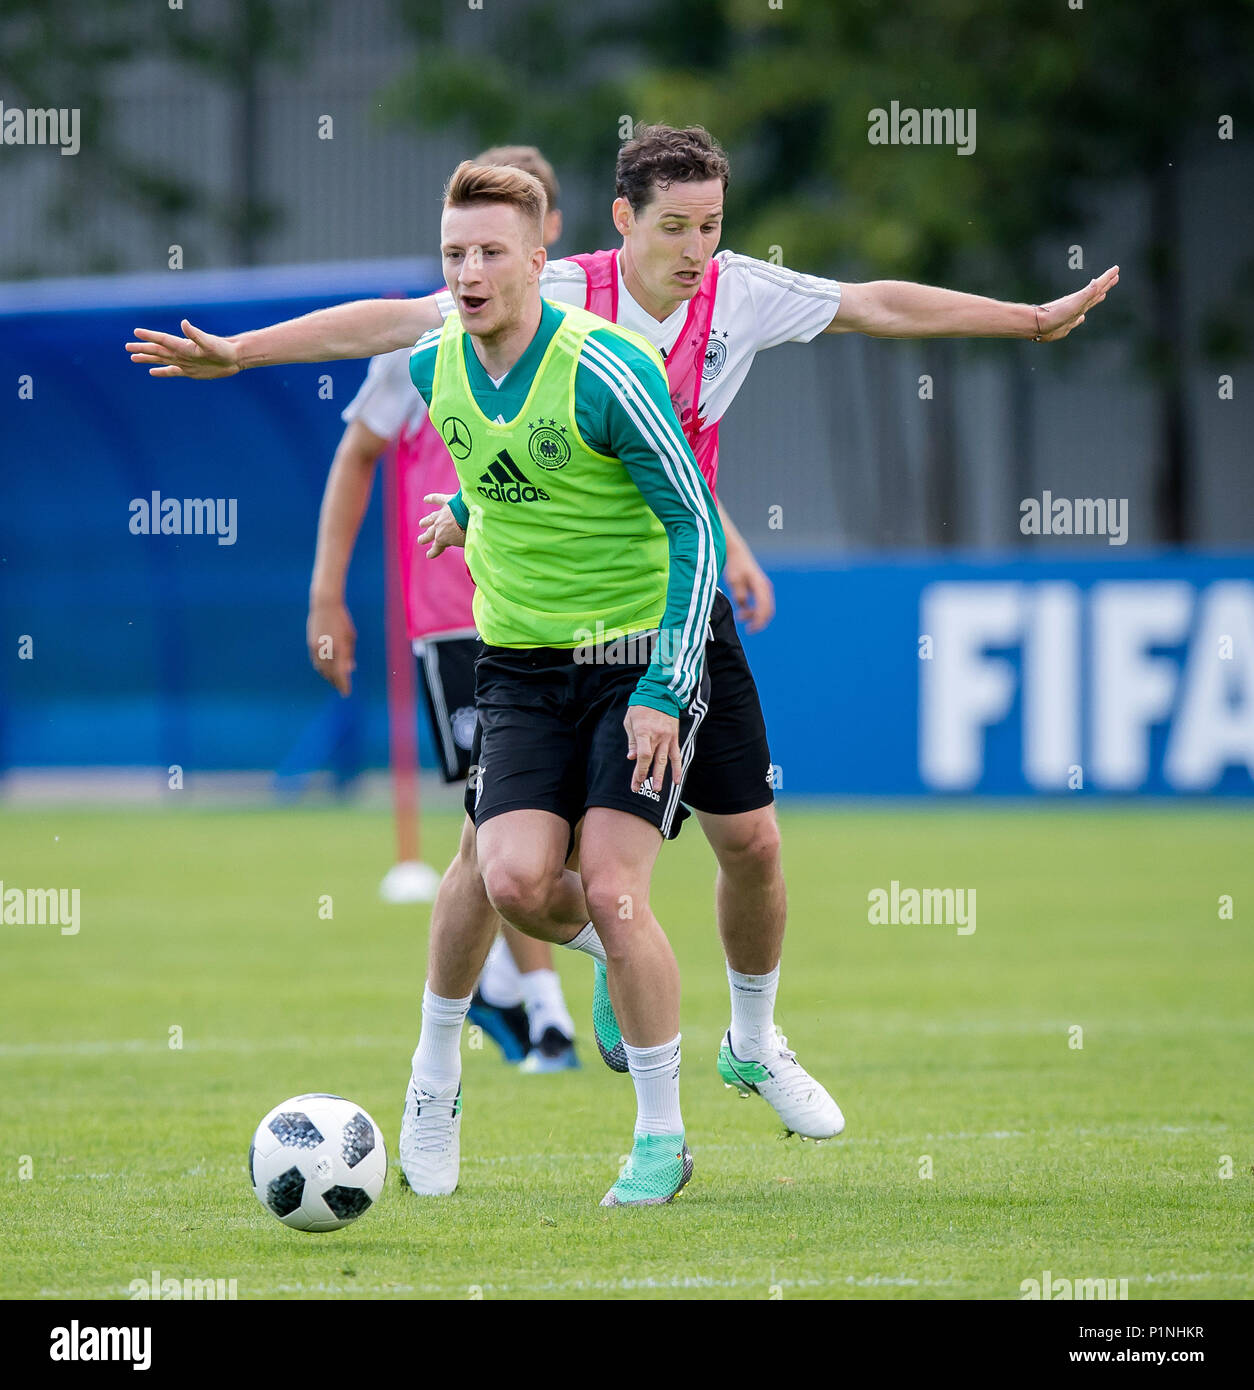 Vatutinki Russland 13th June 18 The German Team Starts Training In Vatutinki German Fans Come To The Facility Marco Reus And Sebastian Rudy Ges Football World Cup 18 Russia Dfb Kick Off Training Moscow Vatutinki 13 06 18